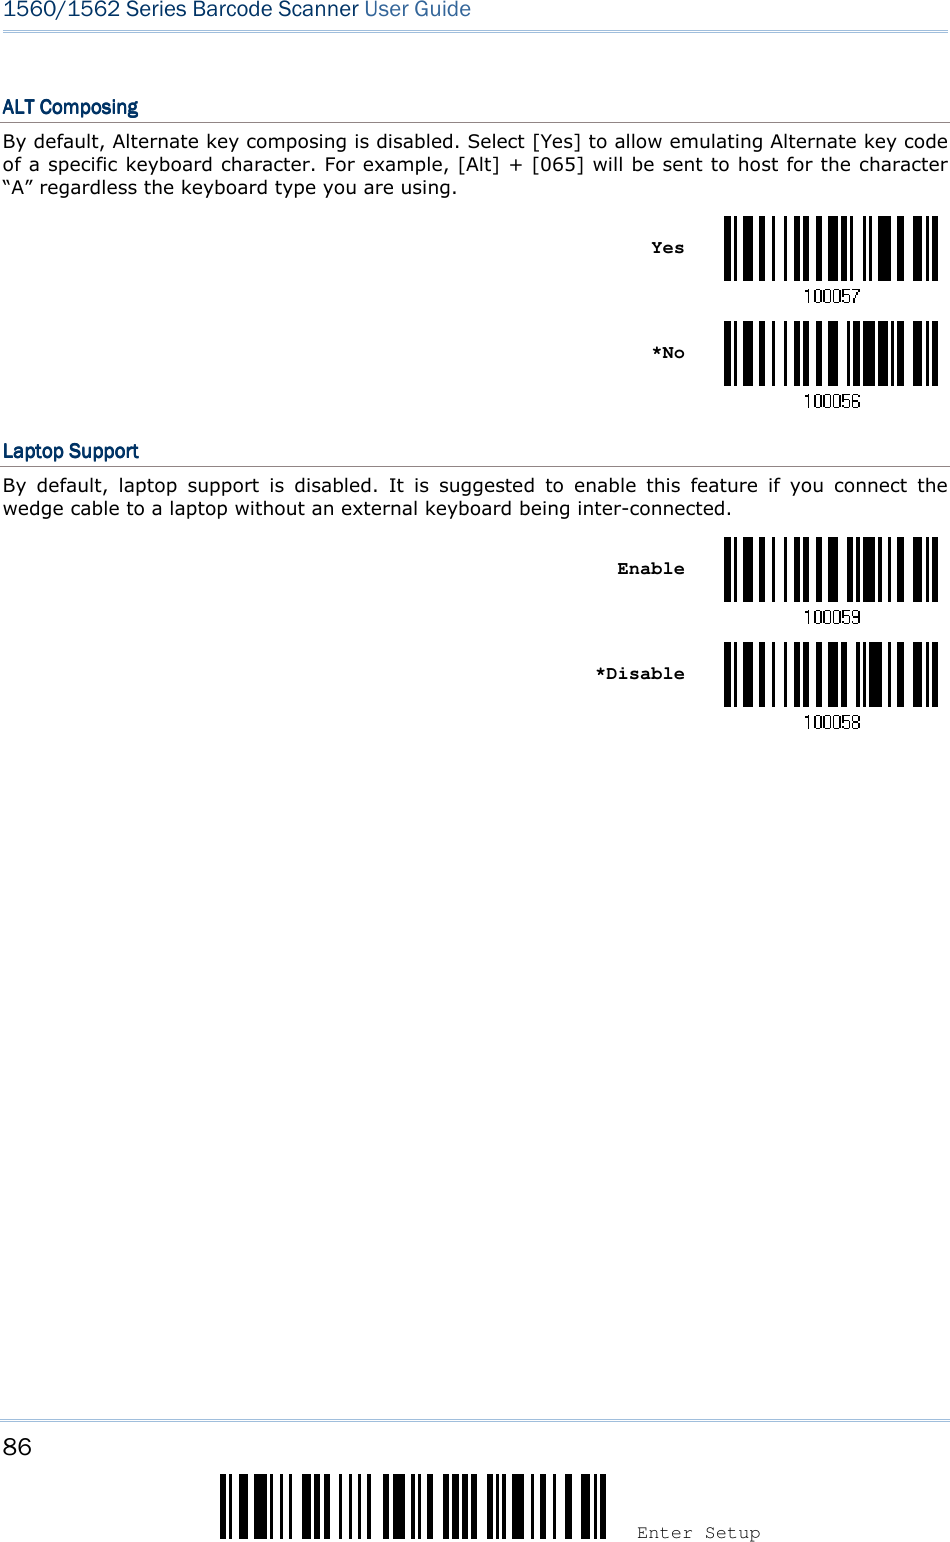 86 Enter Setup 1560/1562 Series Barcode Scanner User Guide  ALT ComposingALT ComposingALT ComposingALT Composing    By default, Alternate key composing is disabled. Select [Yes] to allow emulating Alternate key code of a specific keyboard character. For example, [Alt] + [065] will be sent to host for the character “A” regardless the keyboard type you are using.    Yes     *No  Laptop SupportLaptop SupportLaptop SupportLaptop Support    By  default,  laptop  support  is  disabled.  It  is  suggested  to  enable  this  feature  if  you  connect  the wedge cable to a laptop without an external keyboard being inter-connected.    Enable     *Disable              